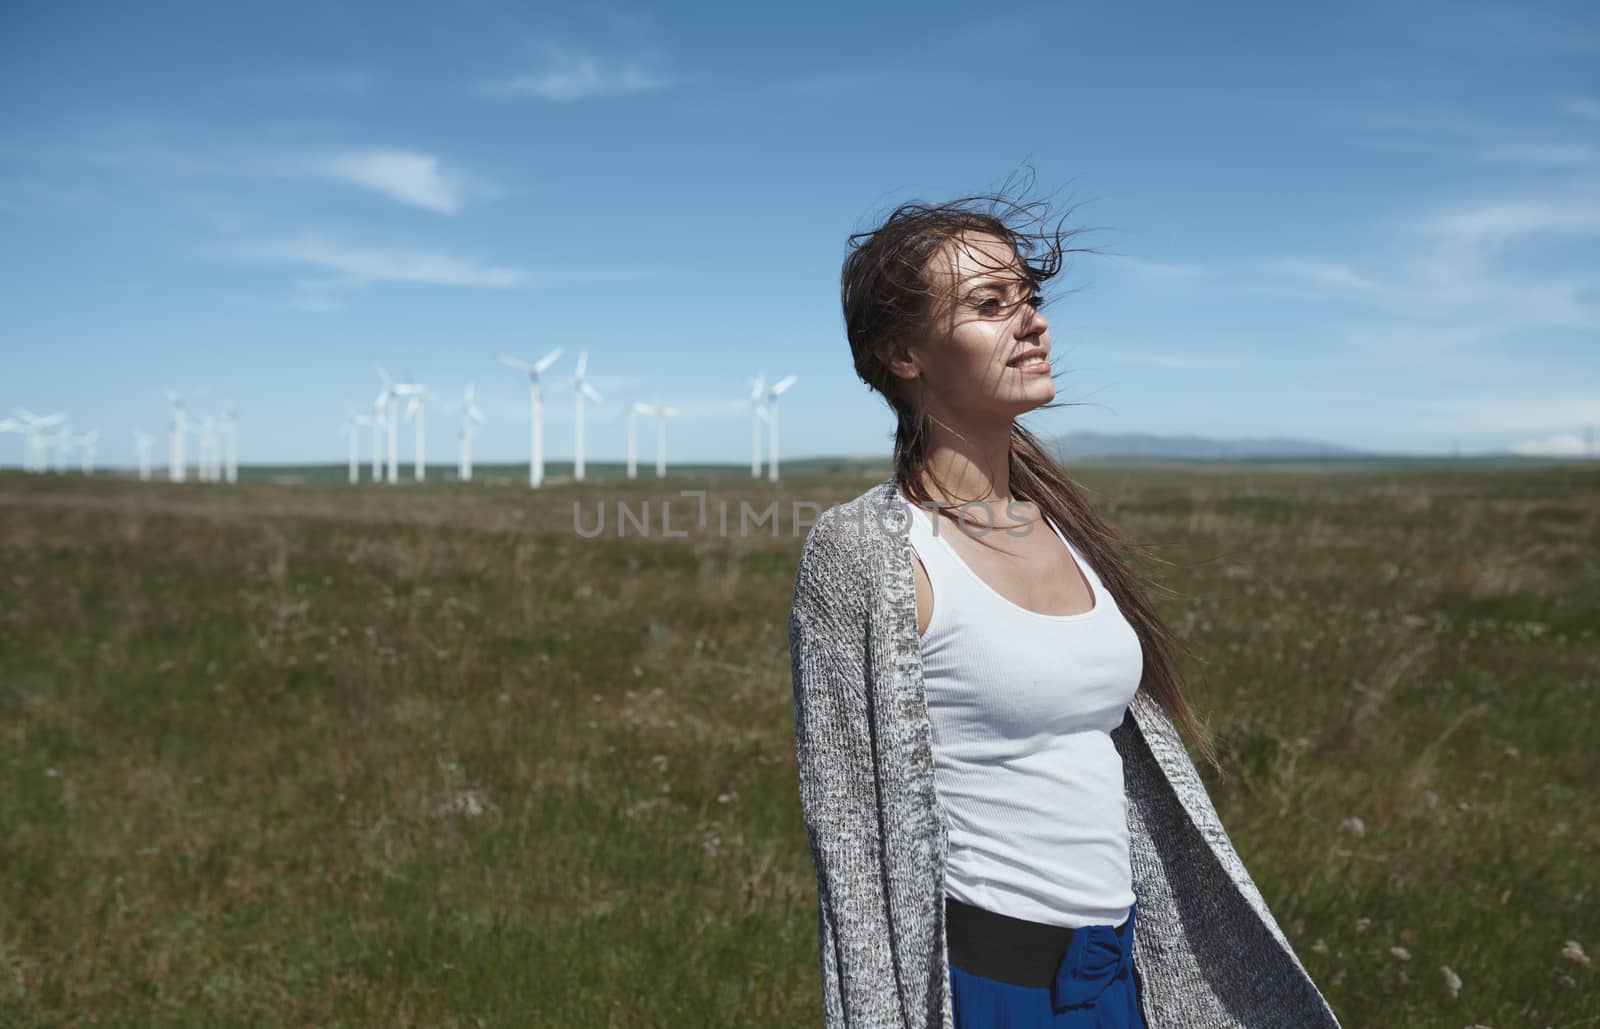 Woman with long tousled hair next to the wind turbine with the w by Novic